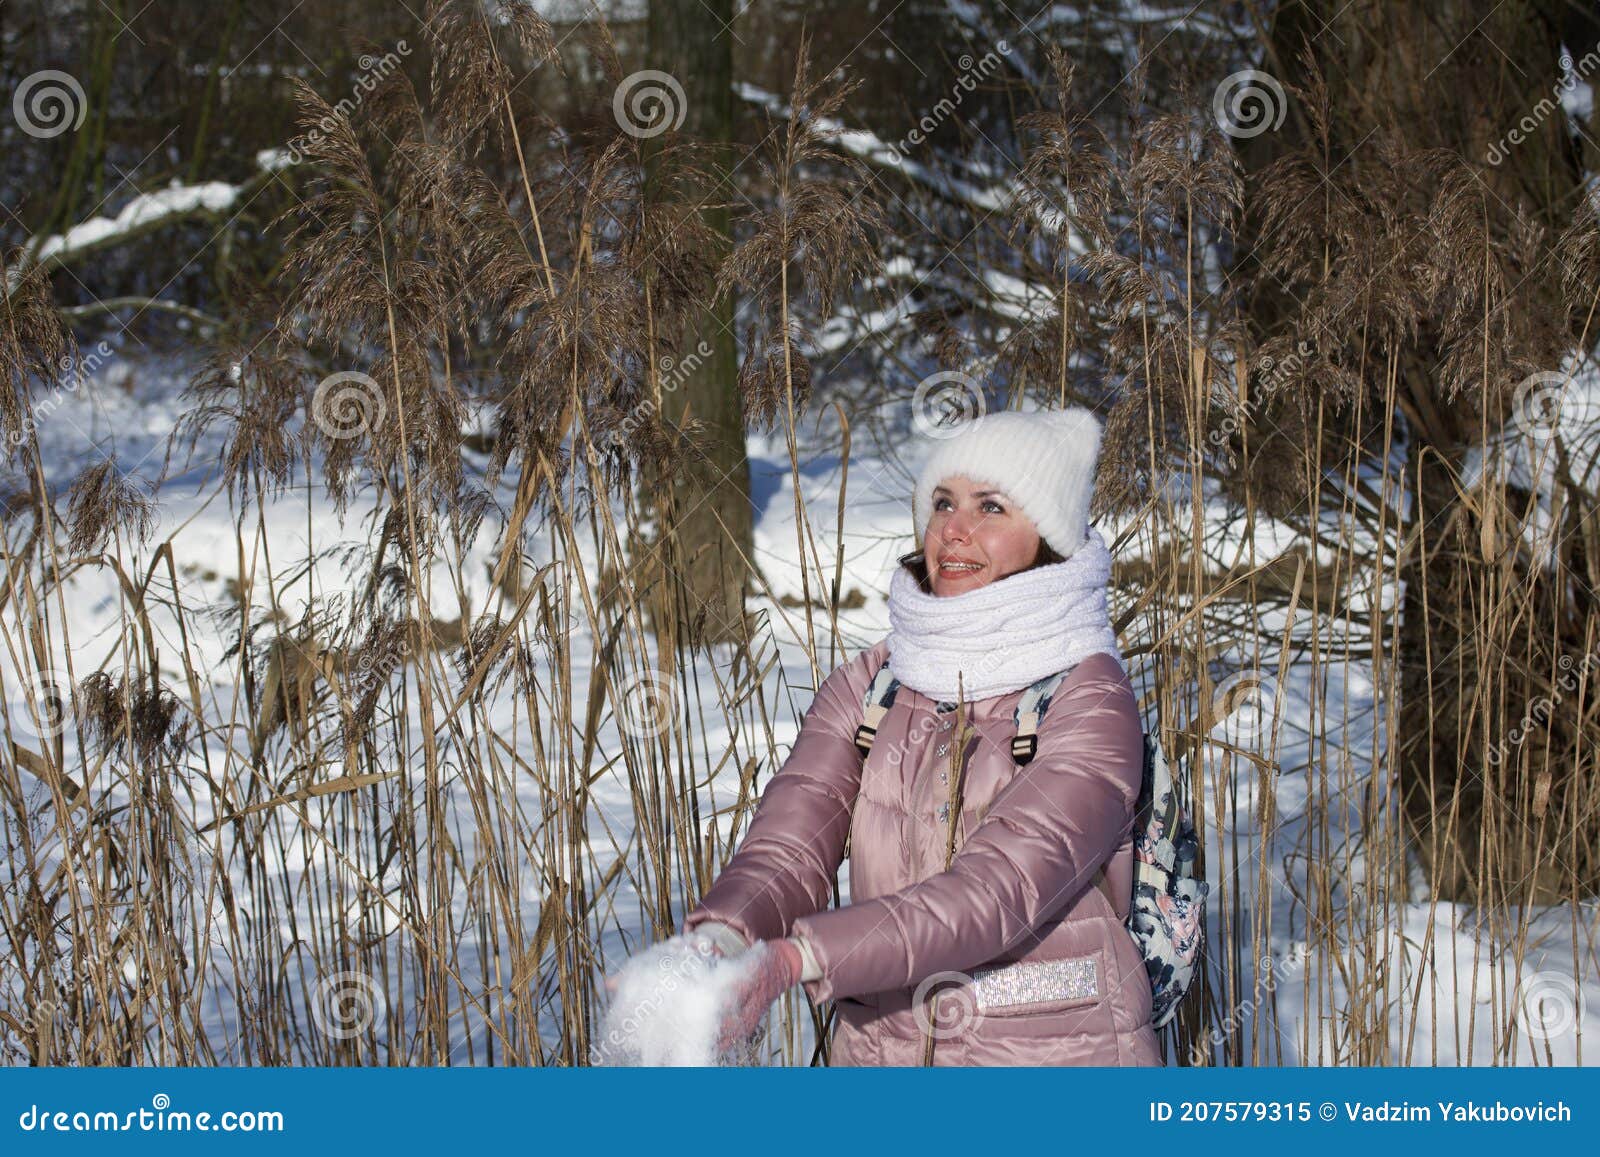 Woman in Winter Clothes on a Walk in the Park. Throws Up a Handful